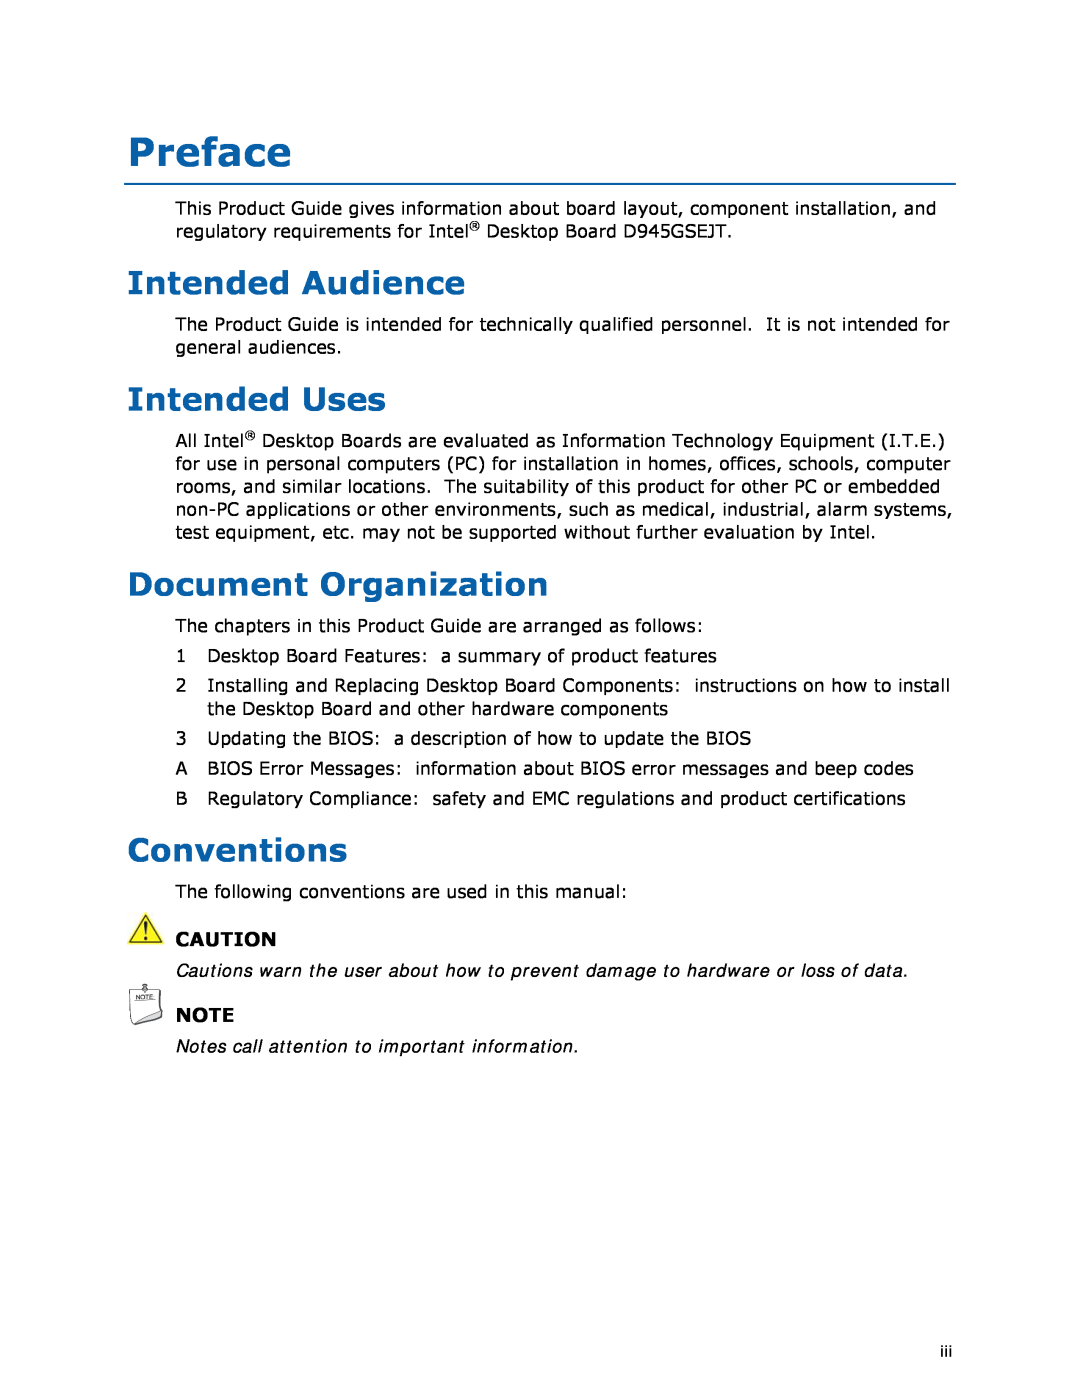 Intel D945GSEJT manual Preface, Intended Audience, Intended Uses, Document Organization, Conventions 